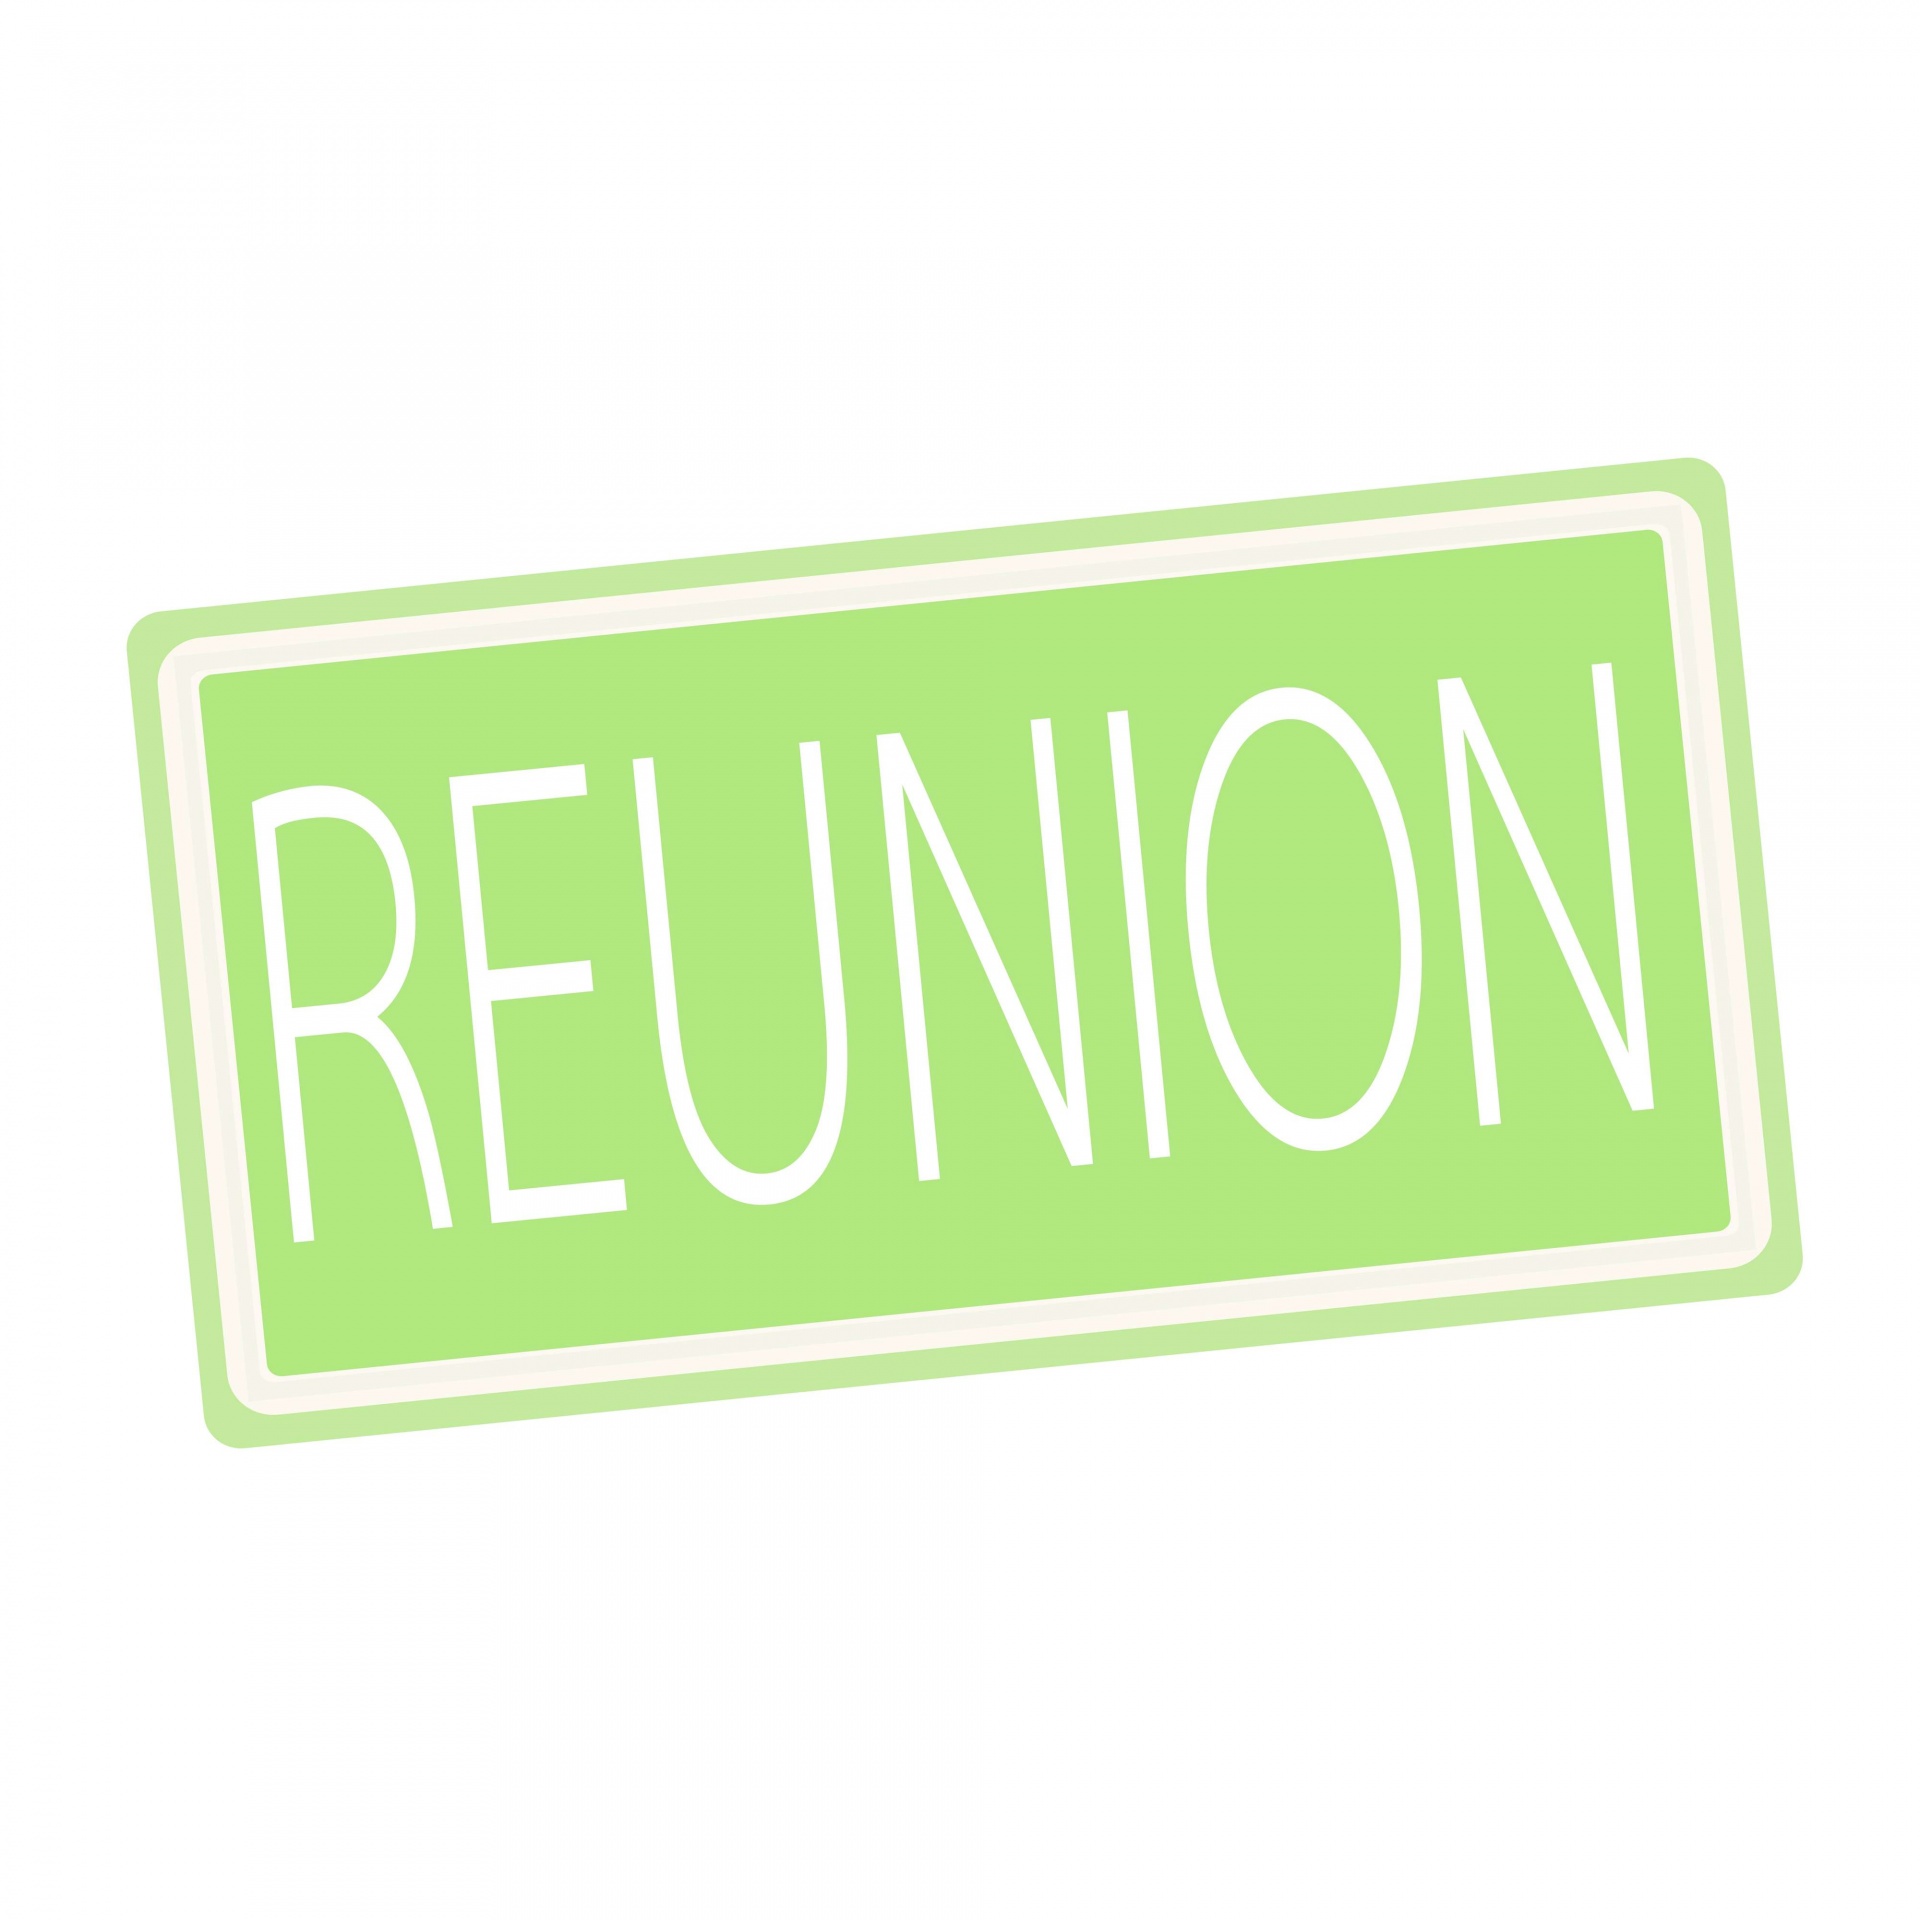 Reunion White Stamp Text On Green